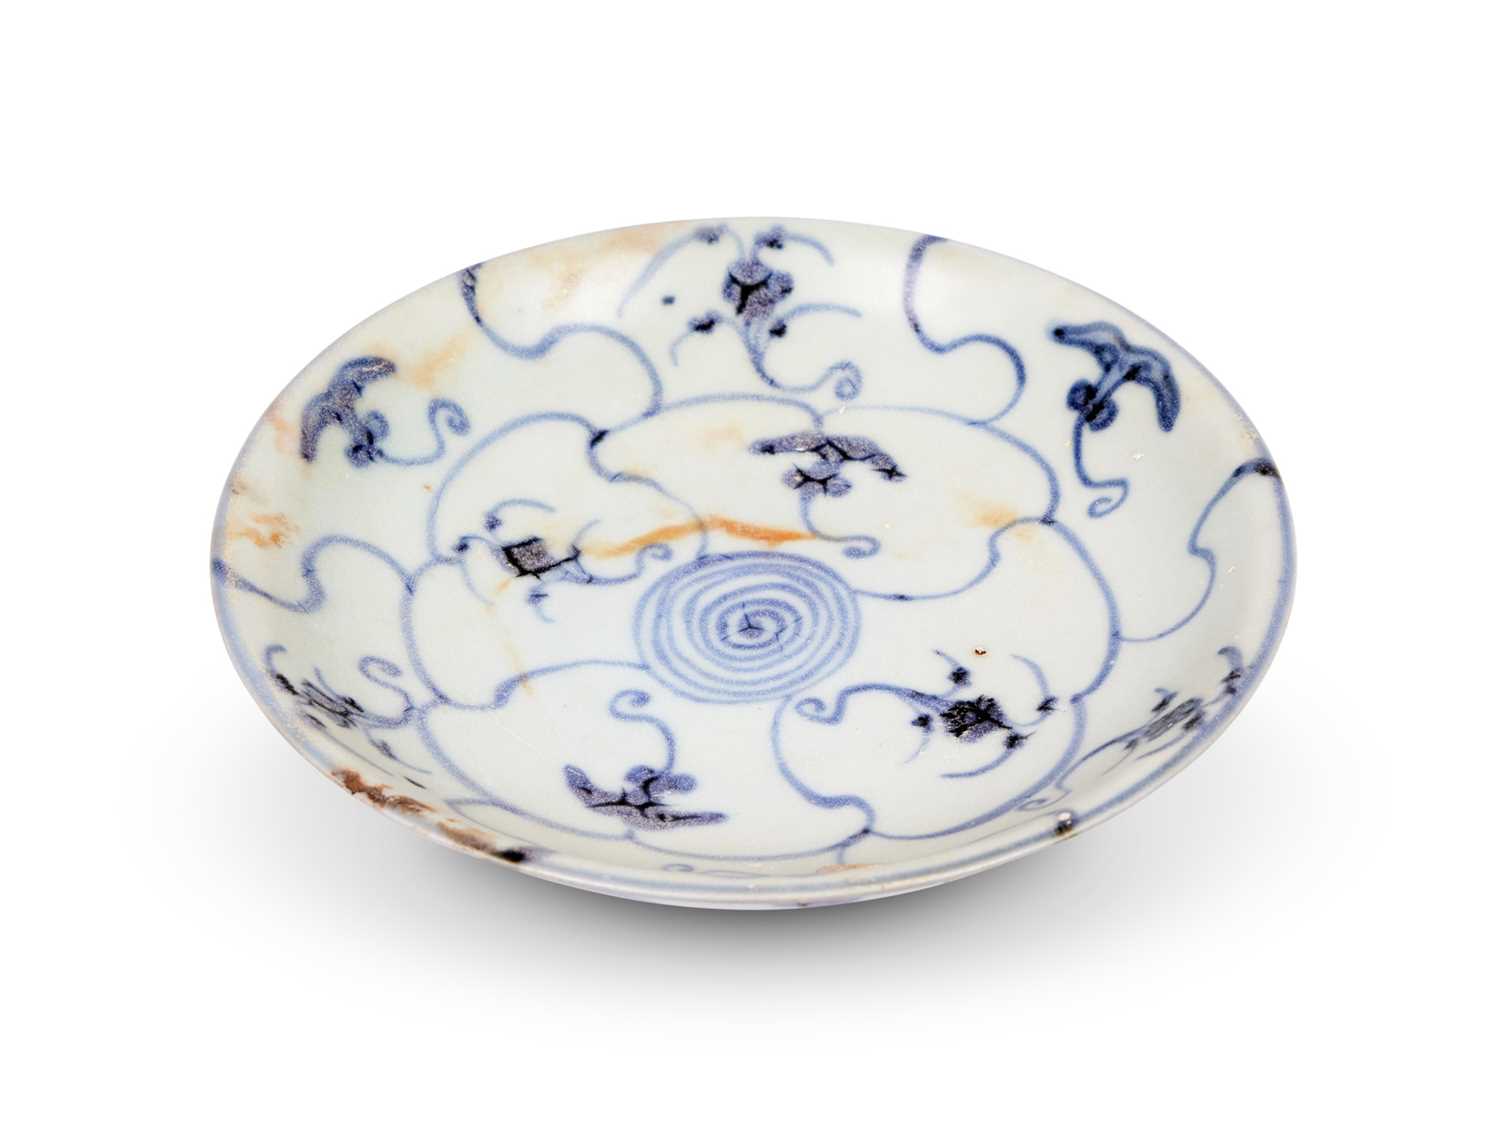 AN EARLY 19TH CENTURY CHINESE PORCELAIN PLATE RECOVERED FROM A SHIP WRECK